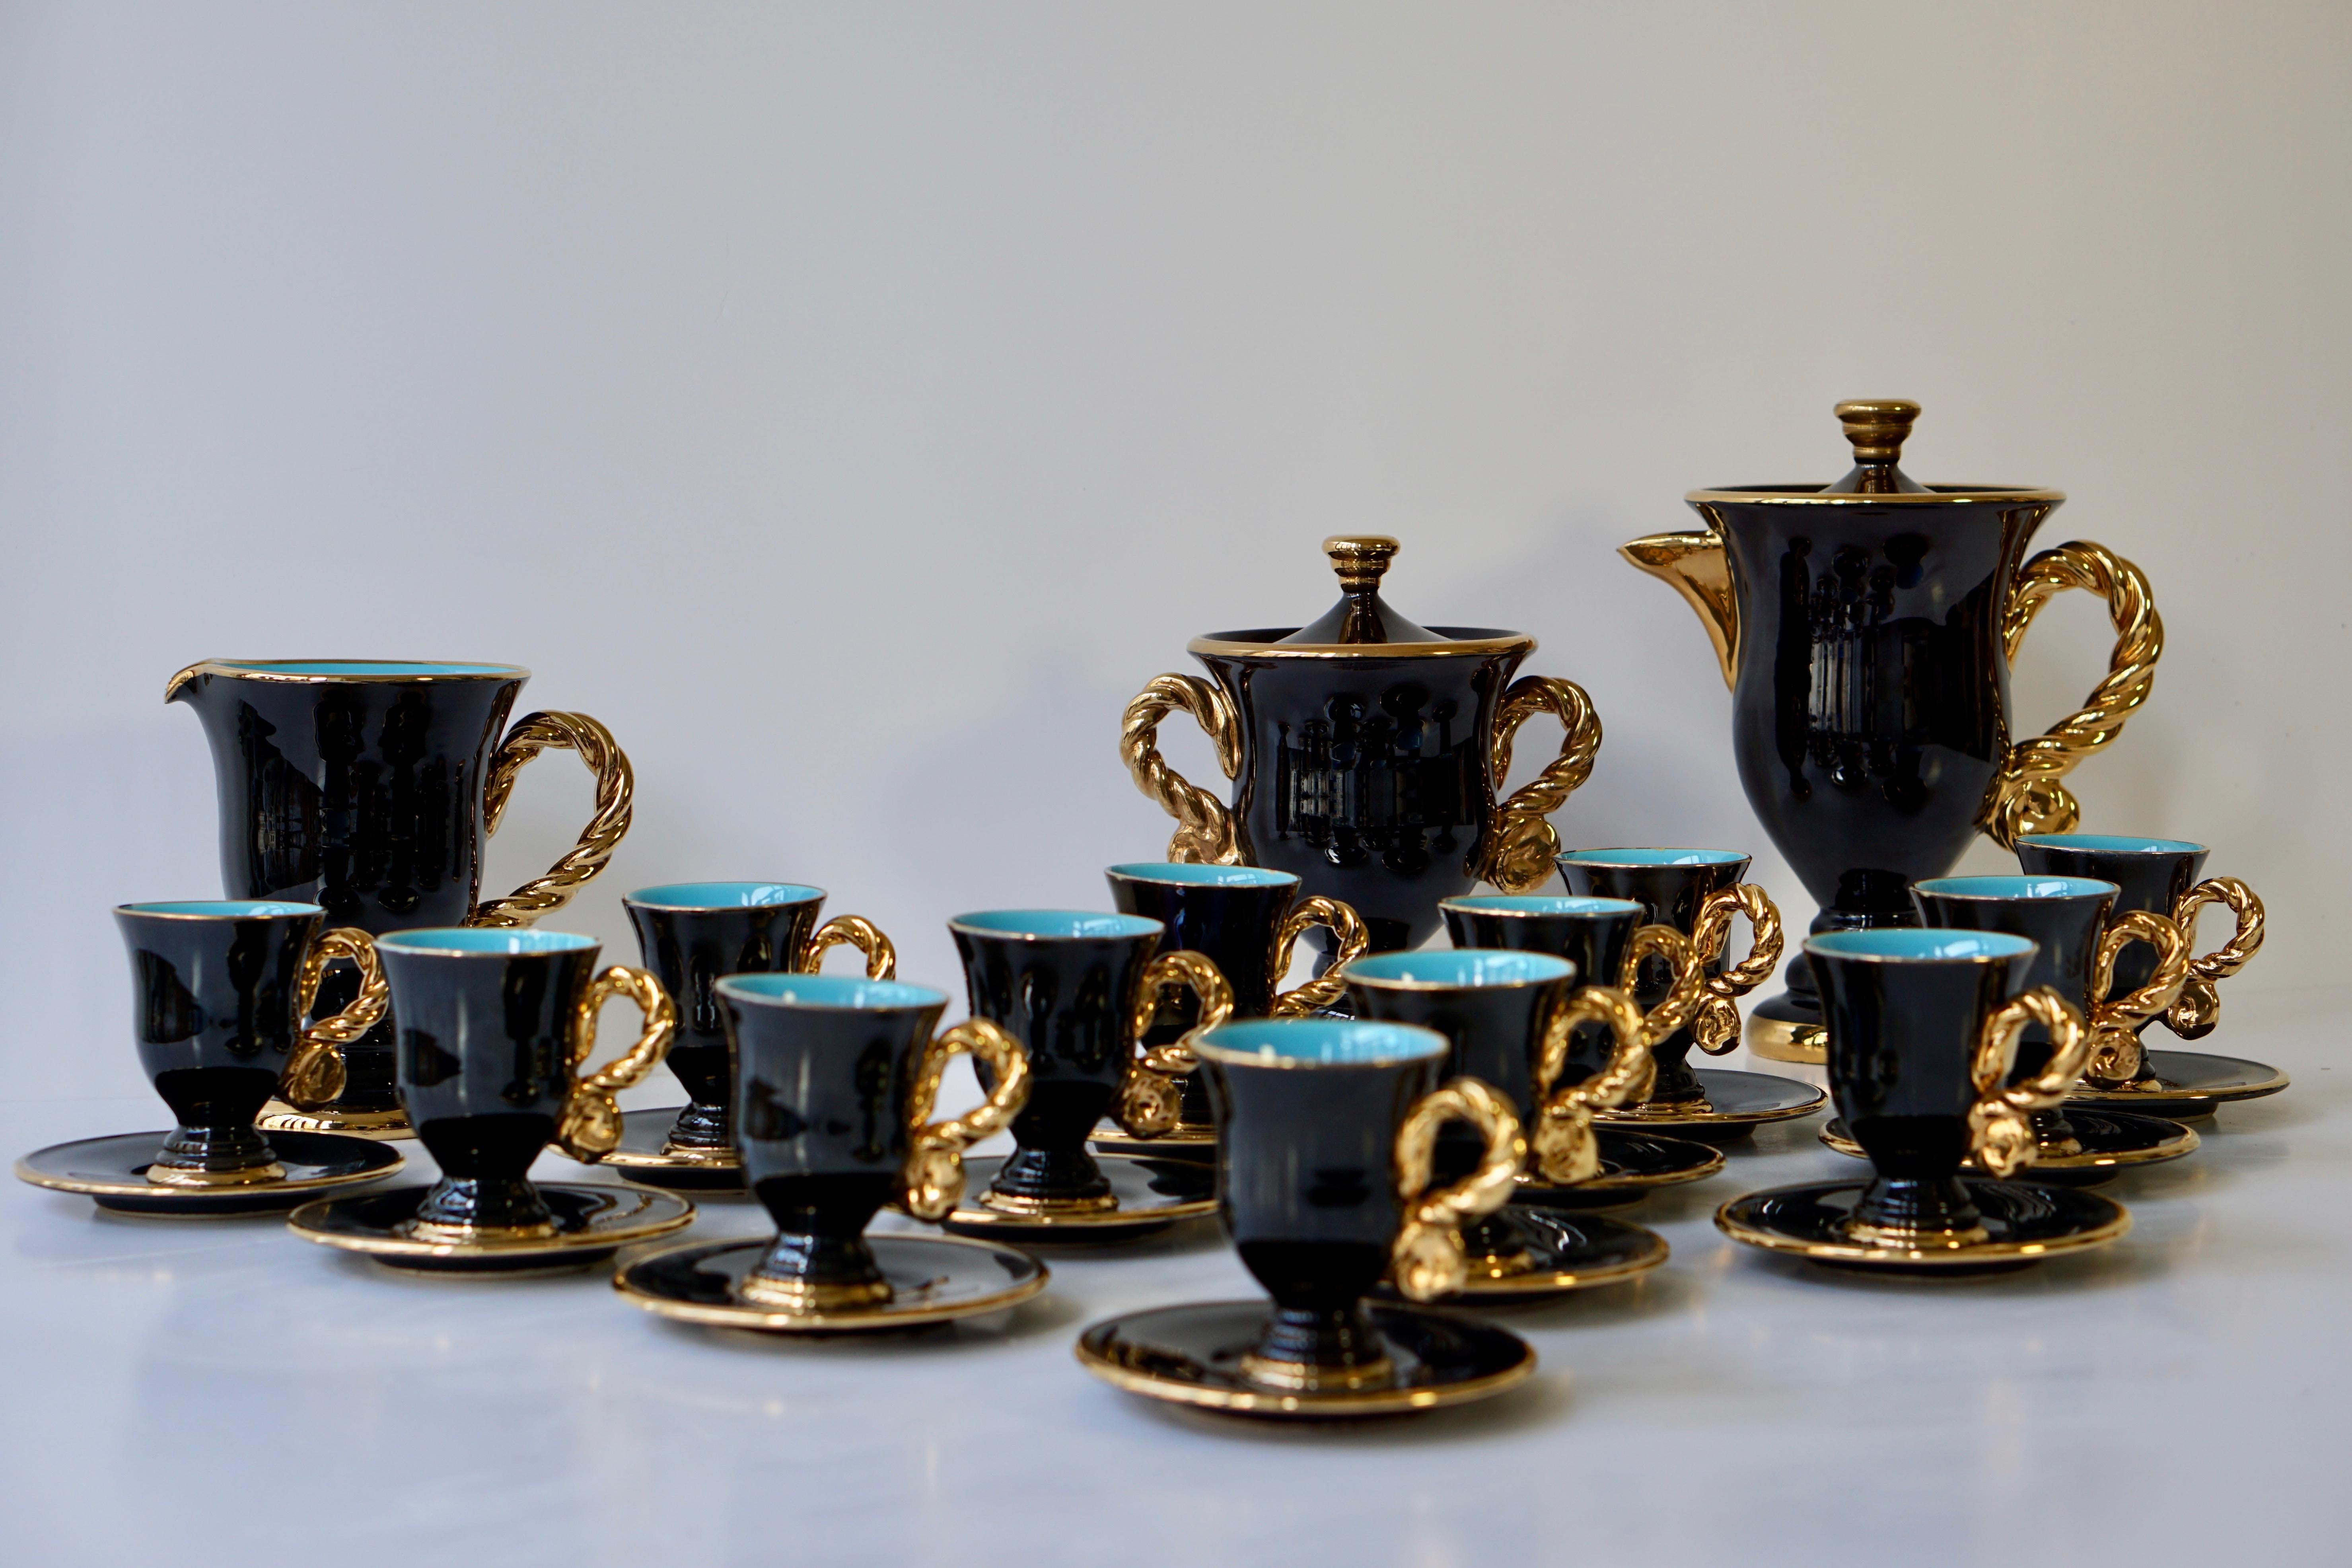 The beautiful set comprised of a tea or coffee pot, a cream jug and a sugar bowl with lid and thirteen cups and saucers, each piece with gilded borders.
Exquisite ceramic, a make prized by collectors the world over.
Coffee pot height 27 cm, width